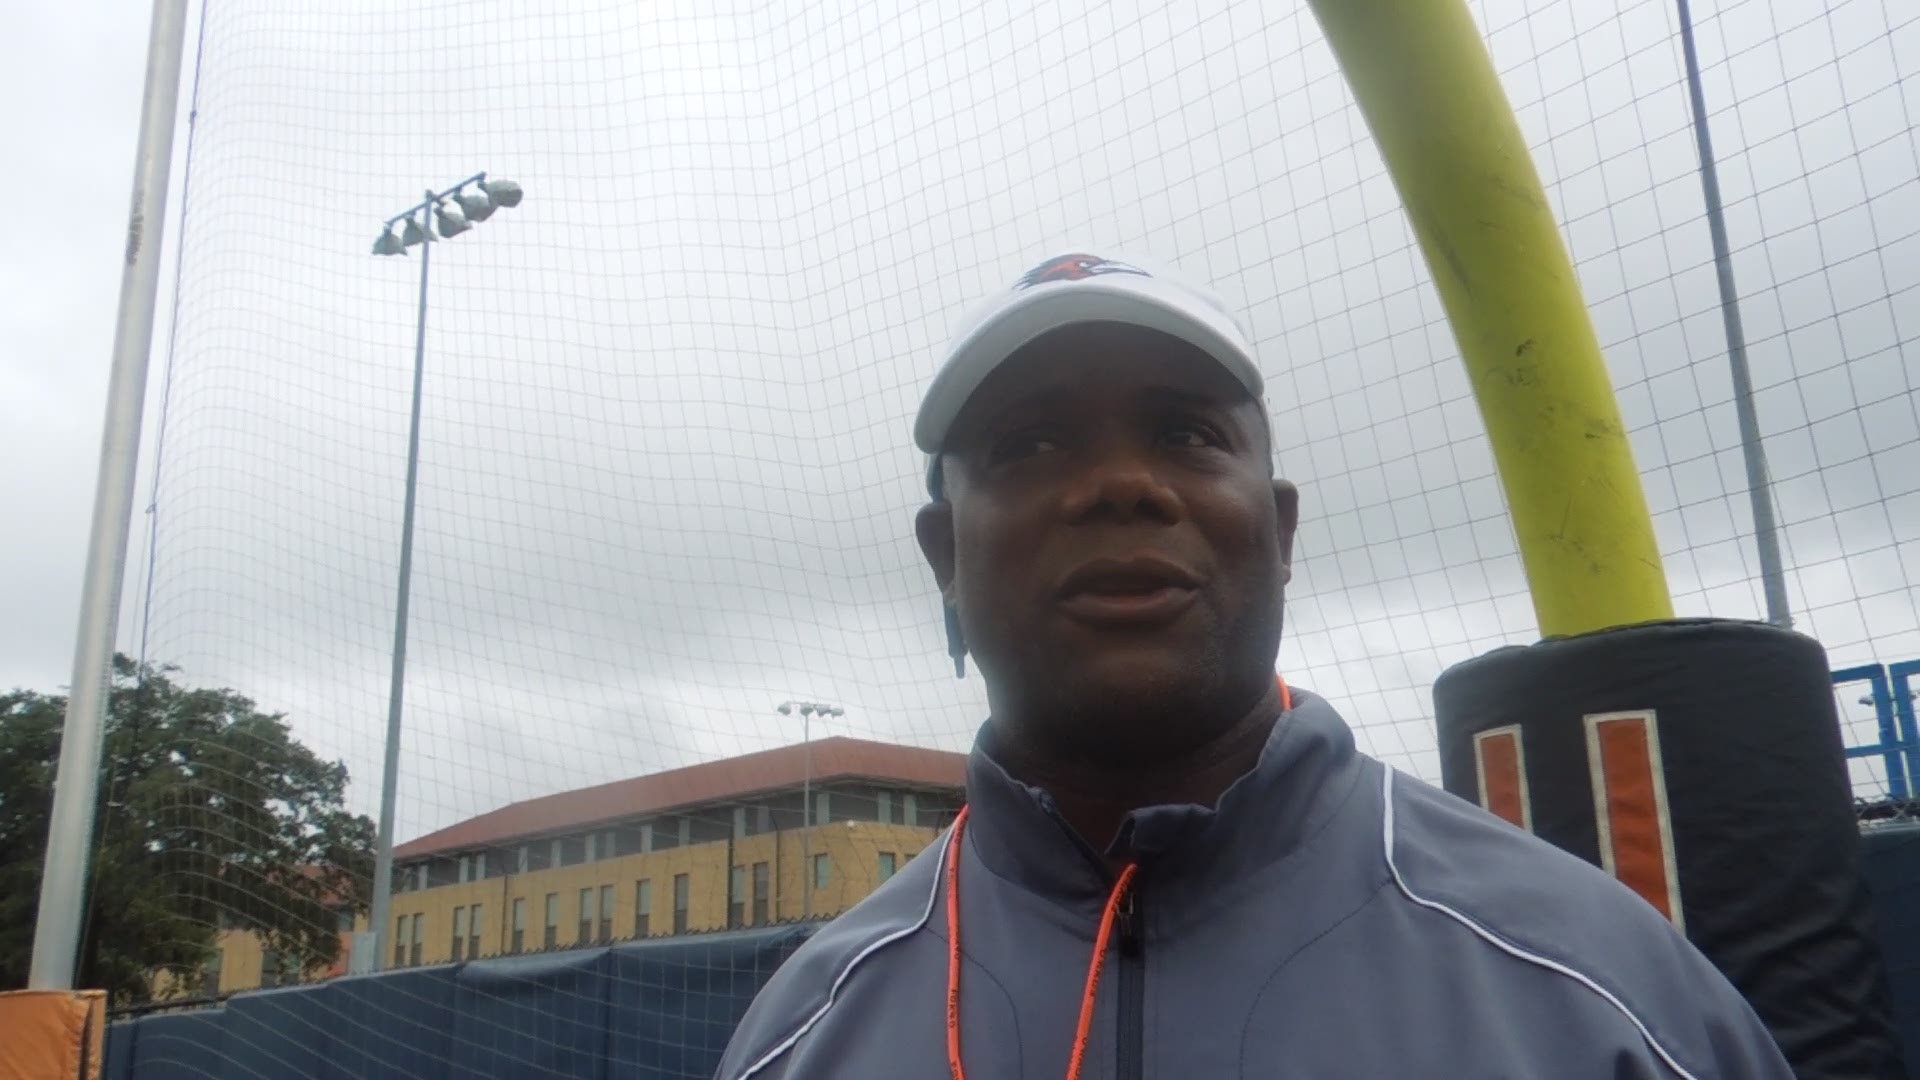 UTSA coach Frank Wilson on getting ready for Southern Miss